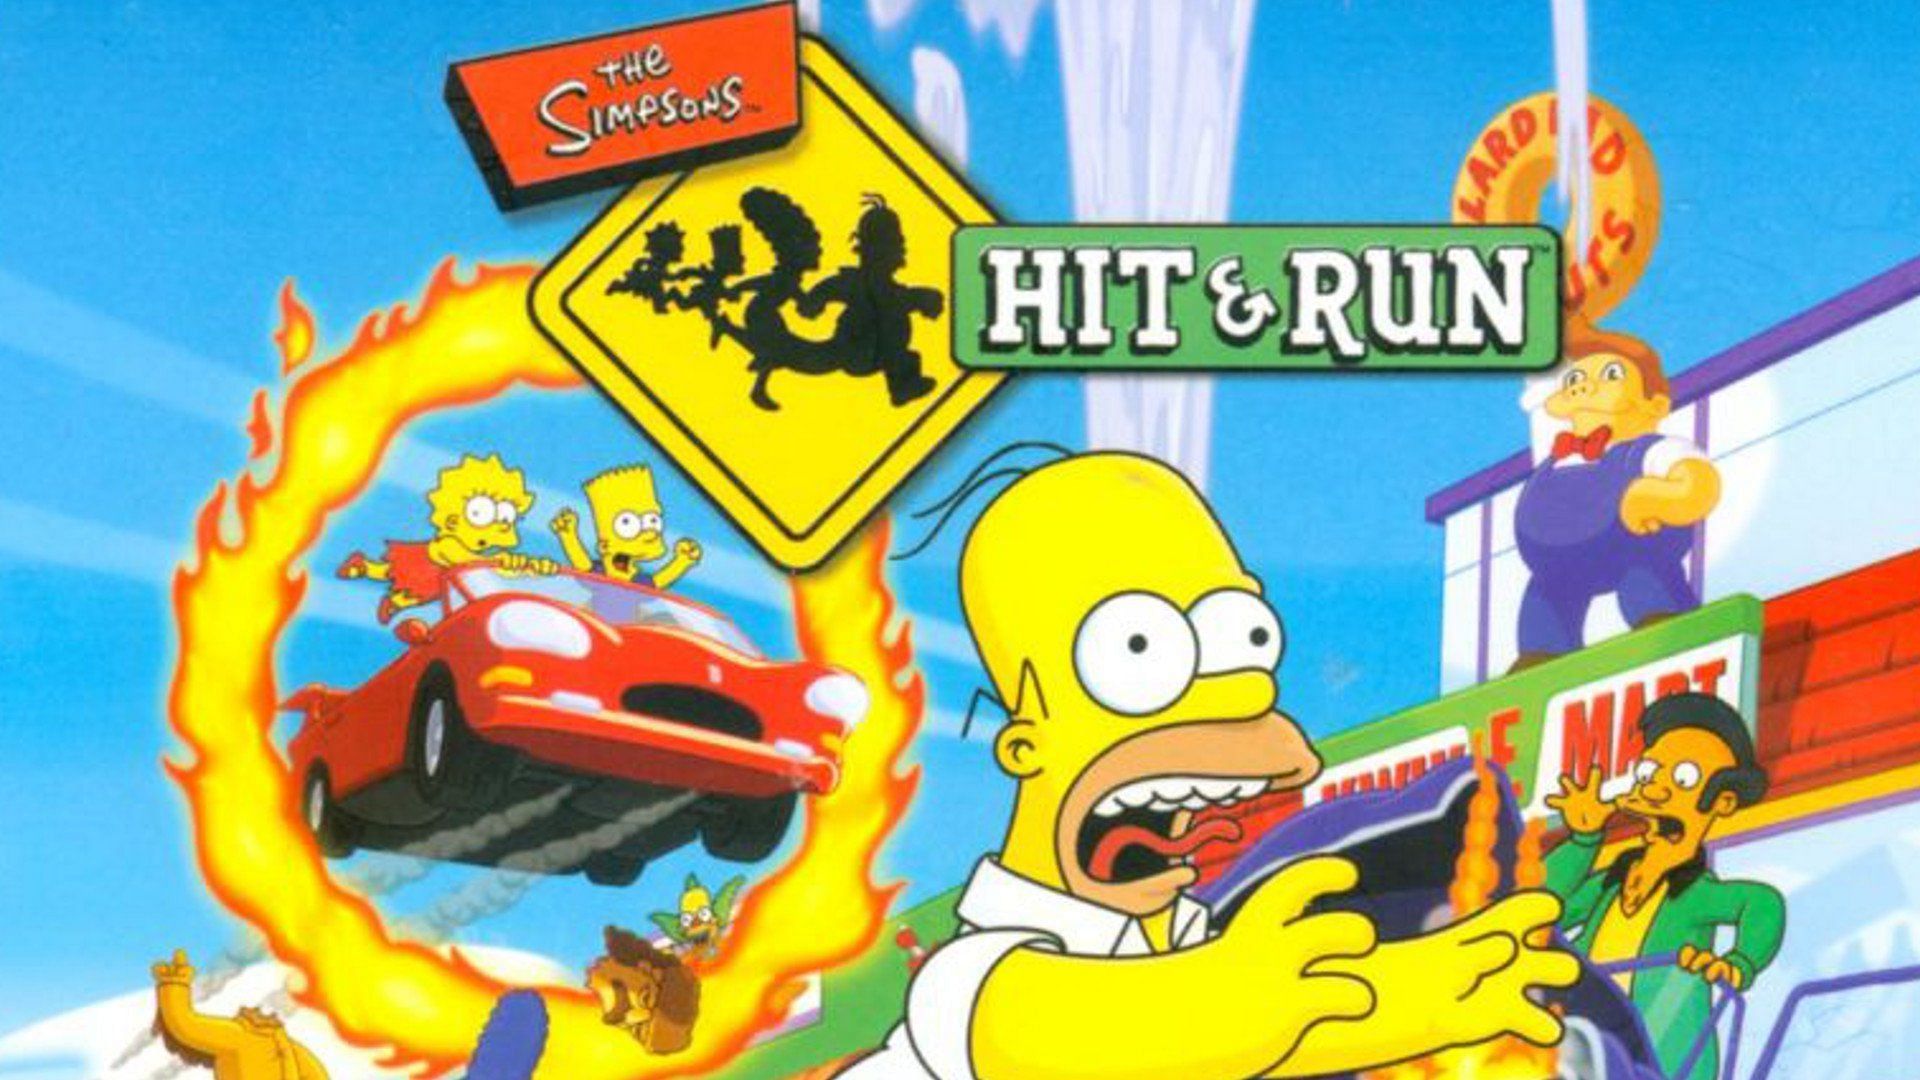 A GTA style-esque game with loads of activities in the simpson universe (Image via Radical Entertainment)